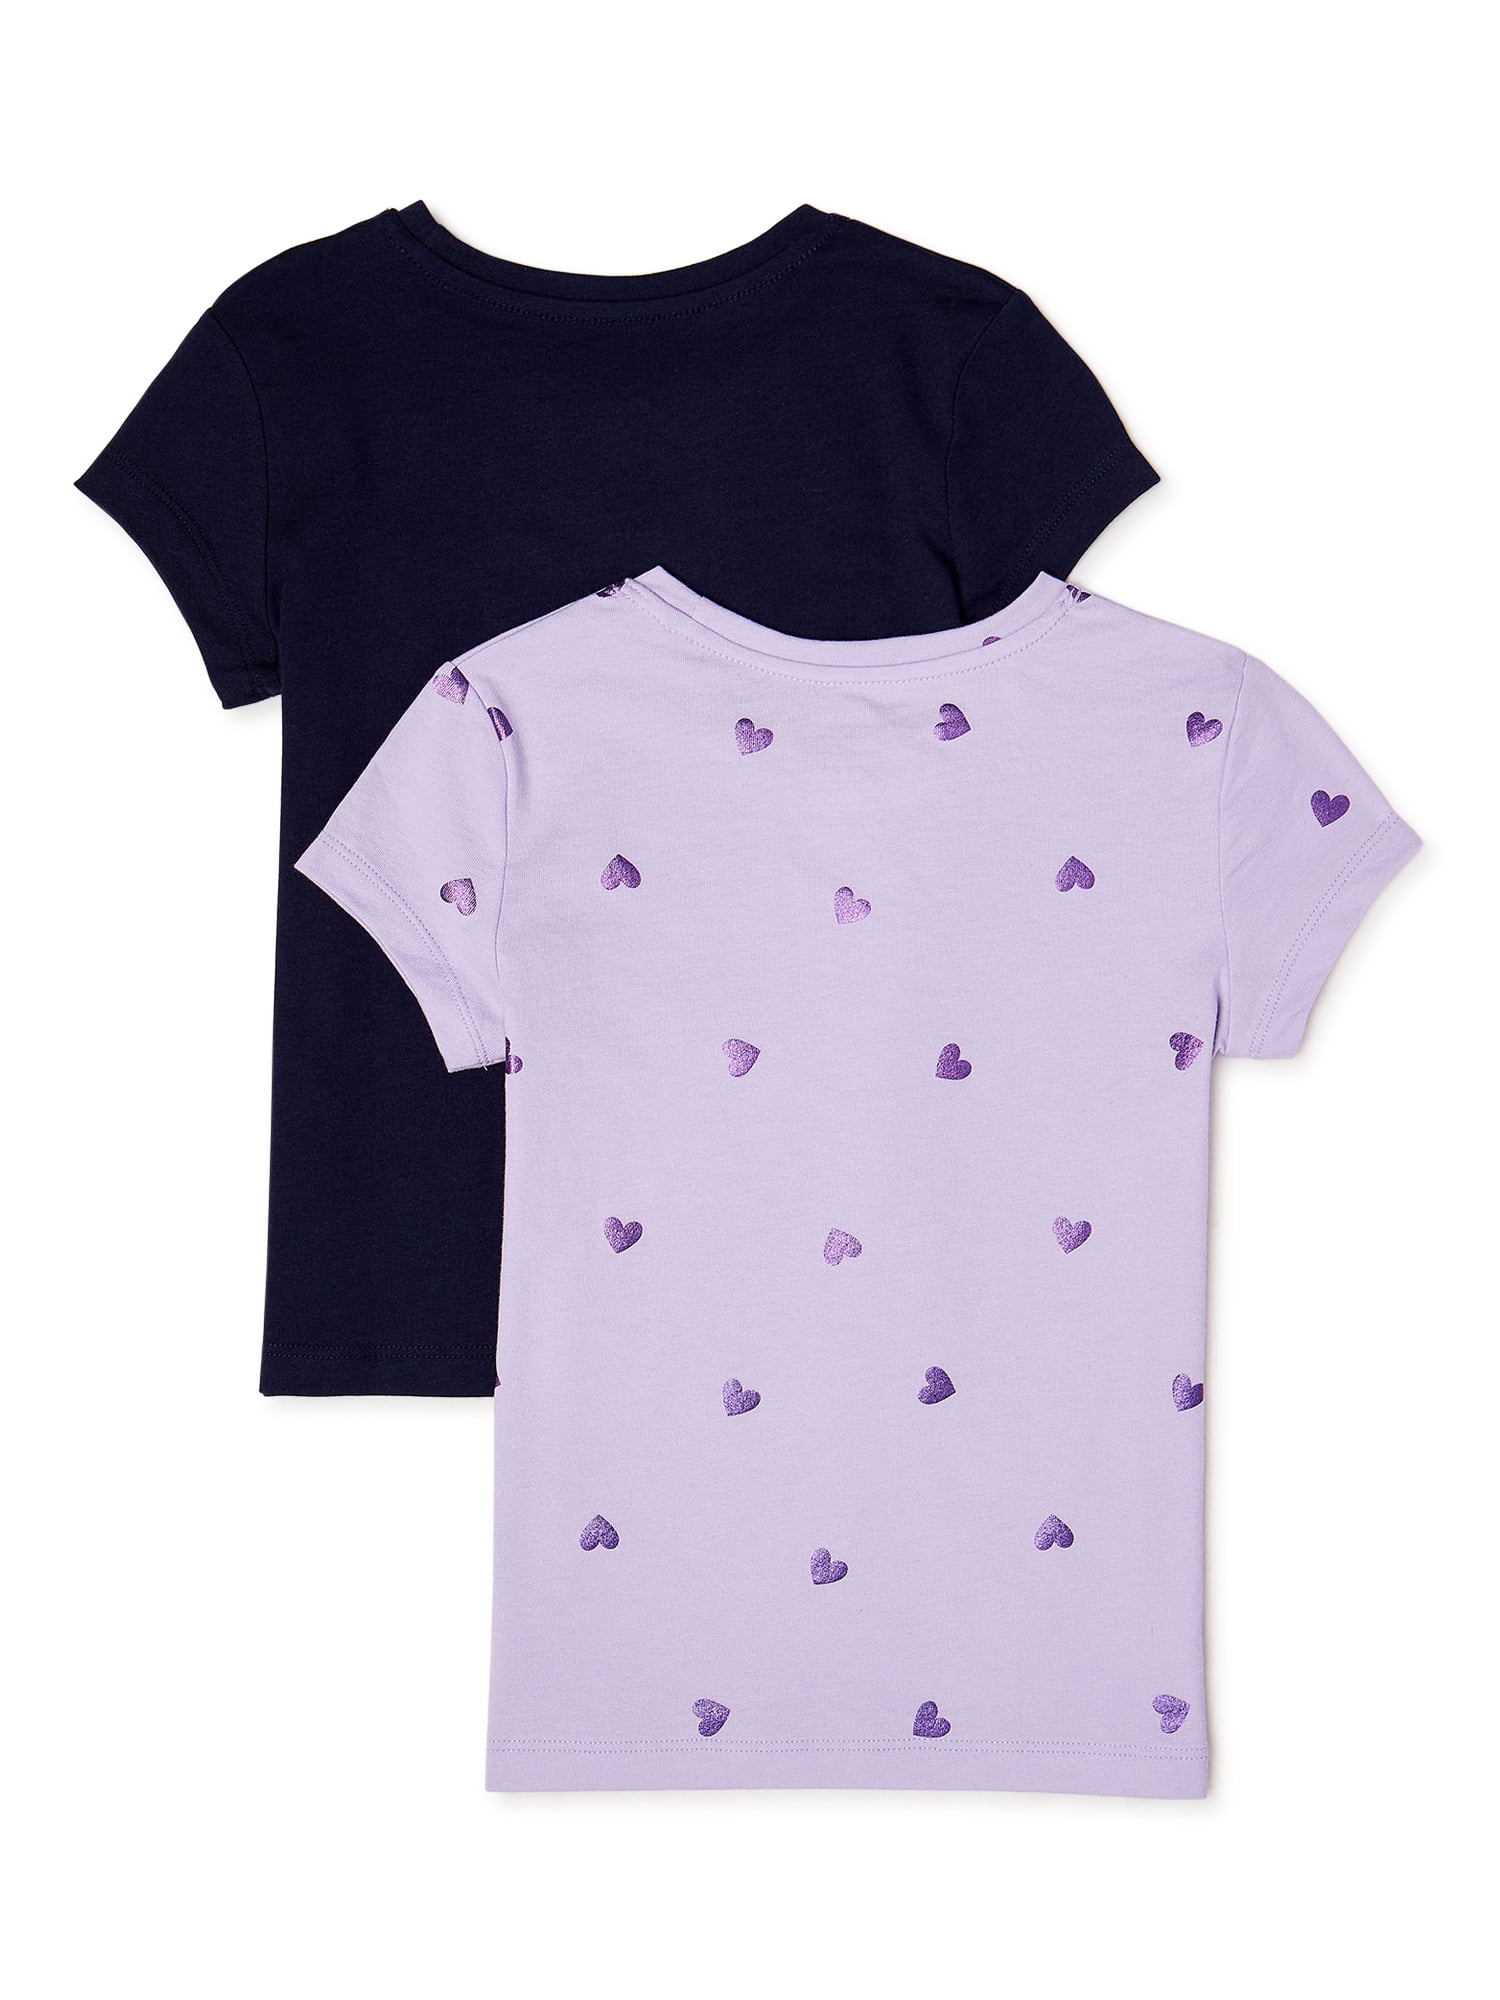 George Girls Heart Pocket T-Shirts, 2-Pack, Sizes 4-18